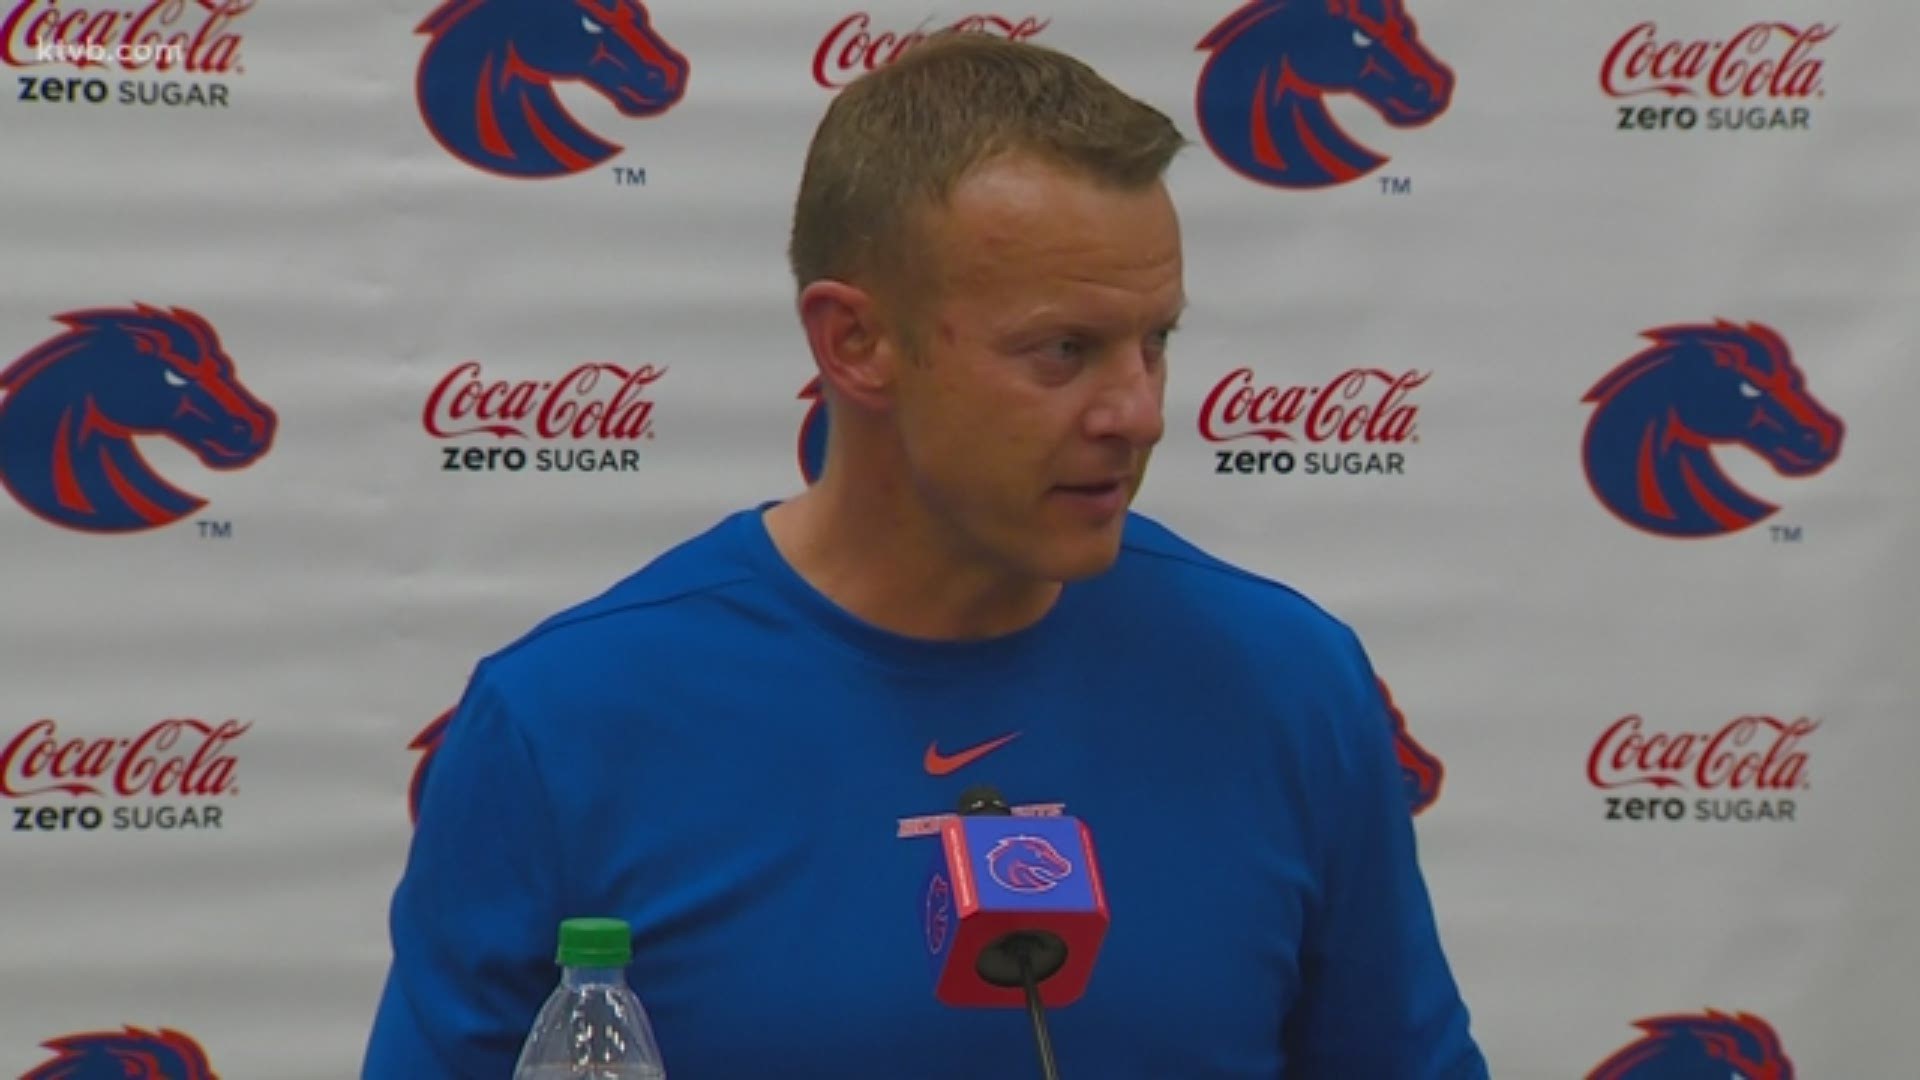 In his weekly news conference, ahead of the Wyoming Cowboys game, coach Harsin gives his thoughts on running the ball in the 4th quarter.